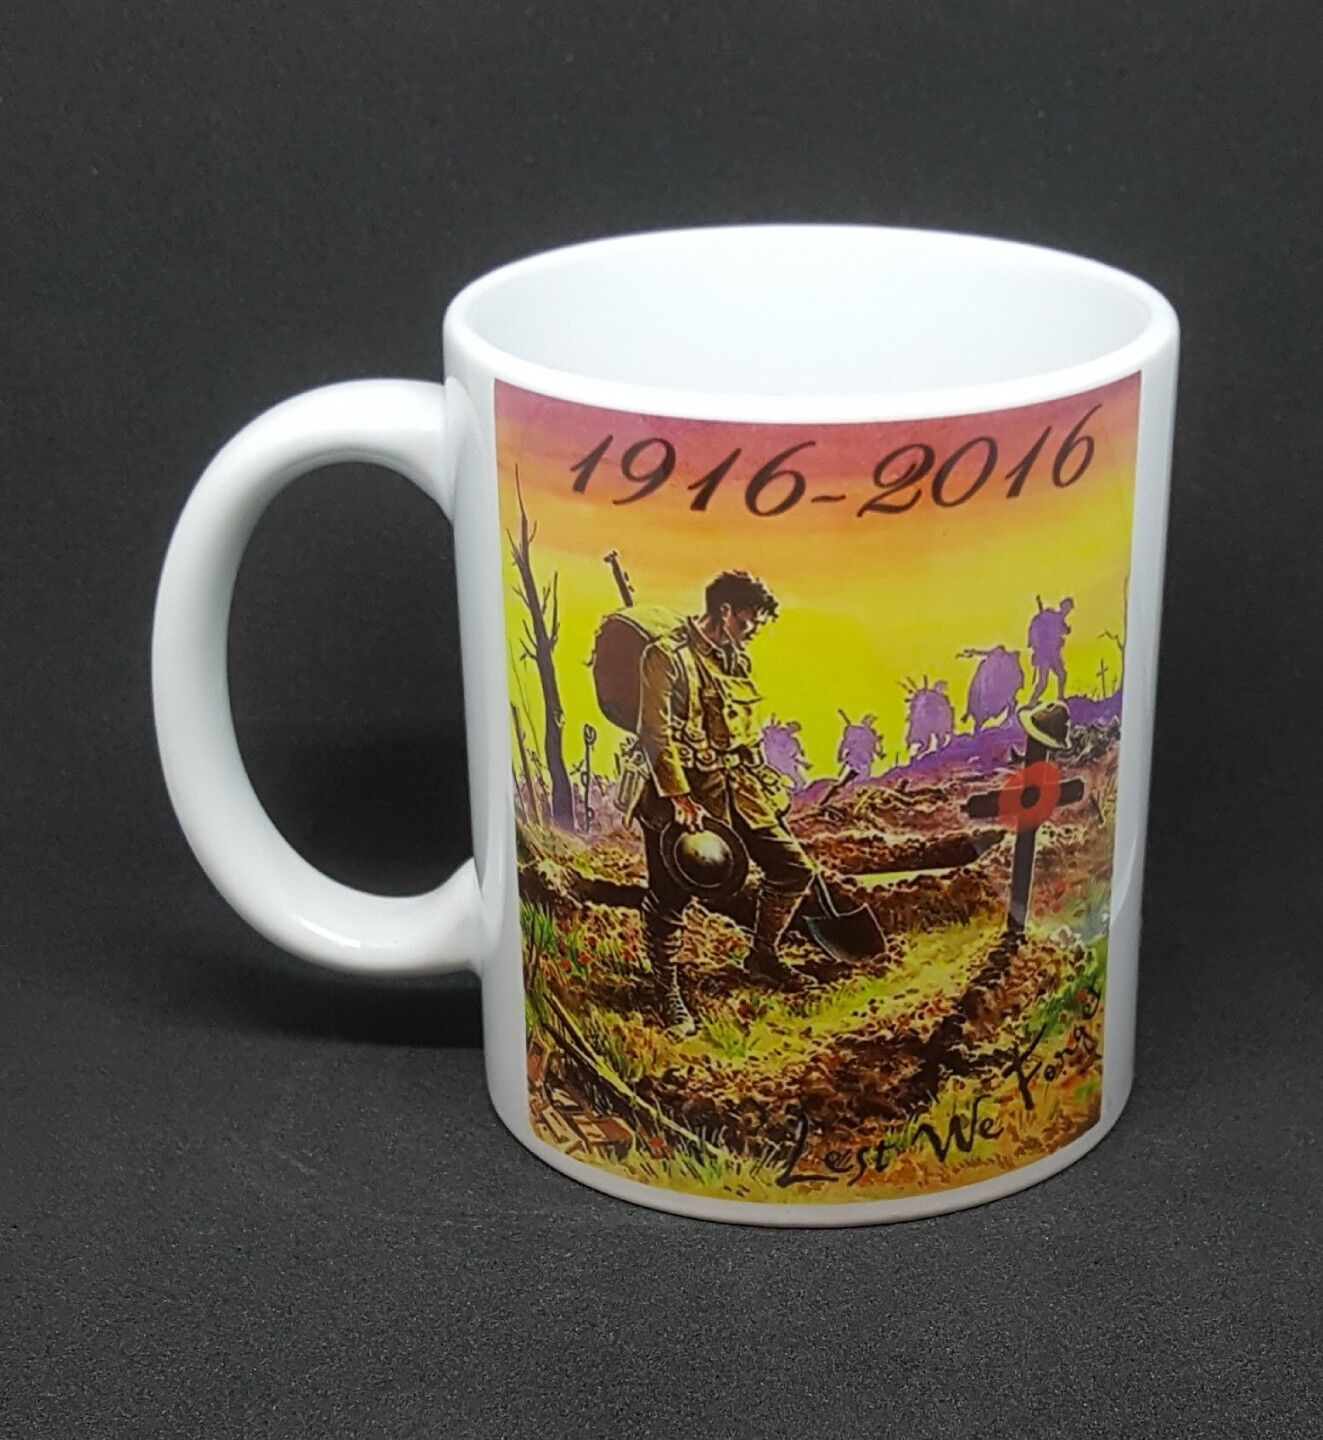 SOMME WORLD WAR ONE COFFEE MUG 1916-2016 BATTLE REMEMBRANCE COMMEMORATION GIFT